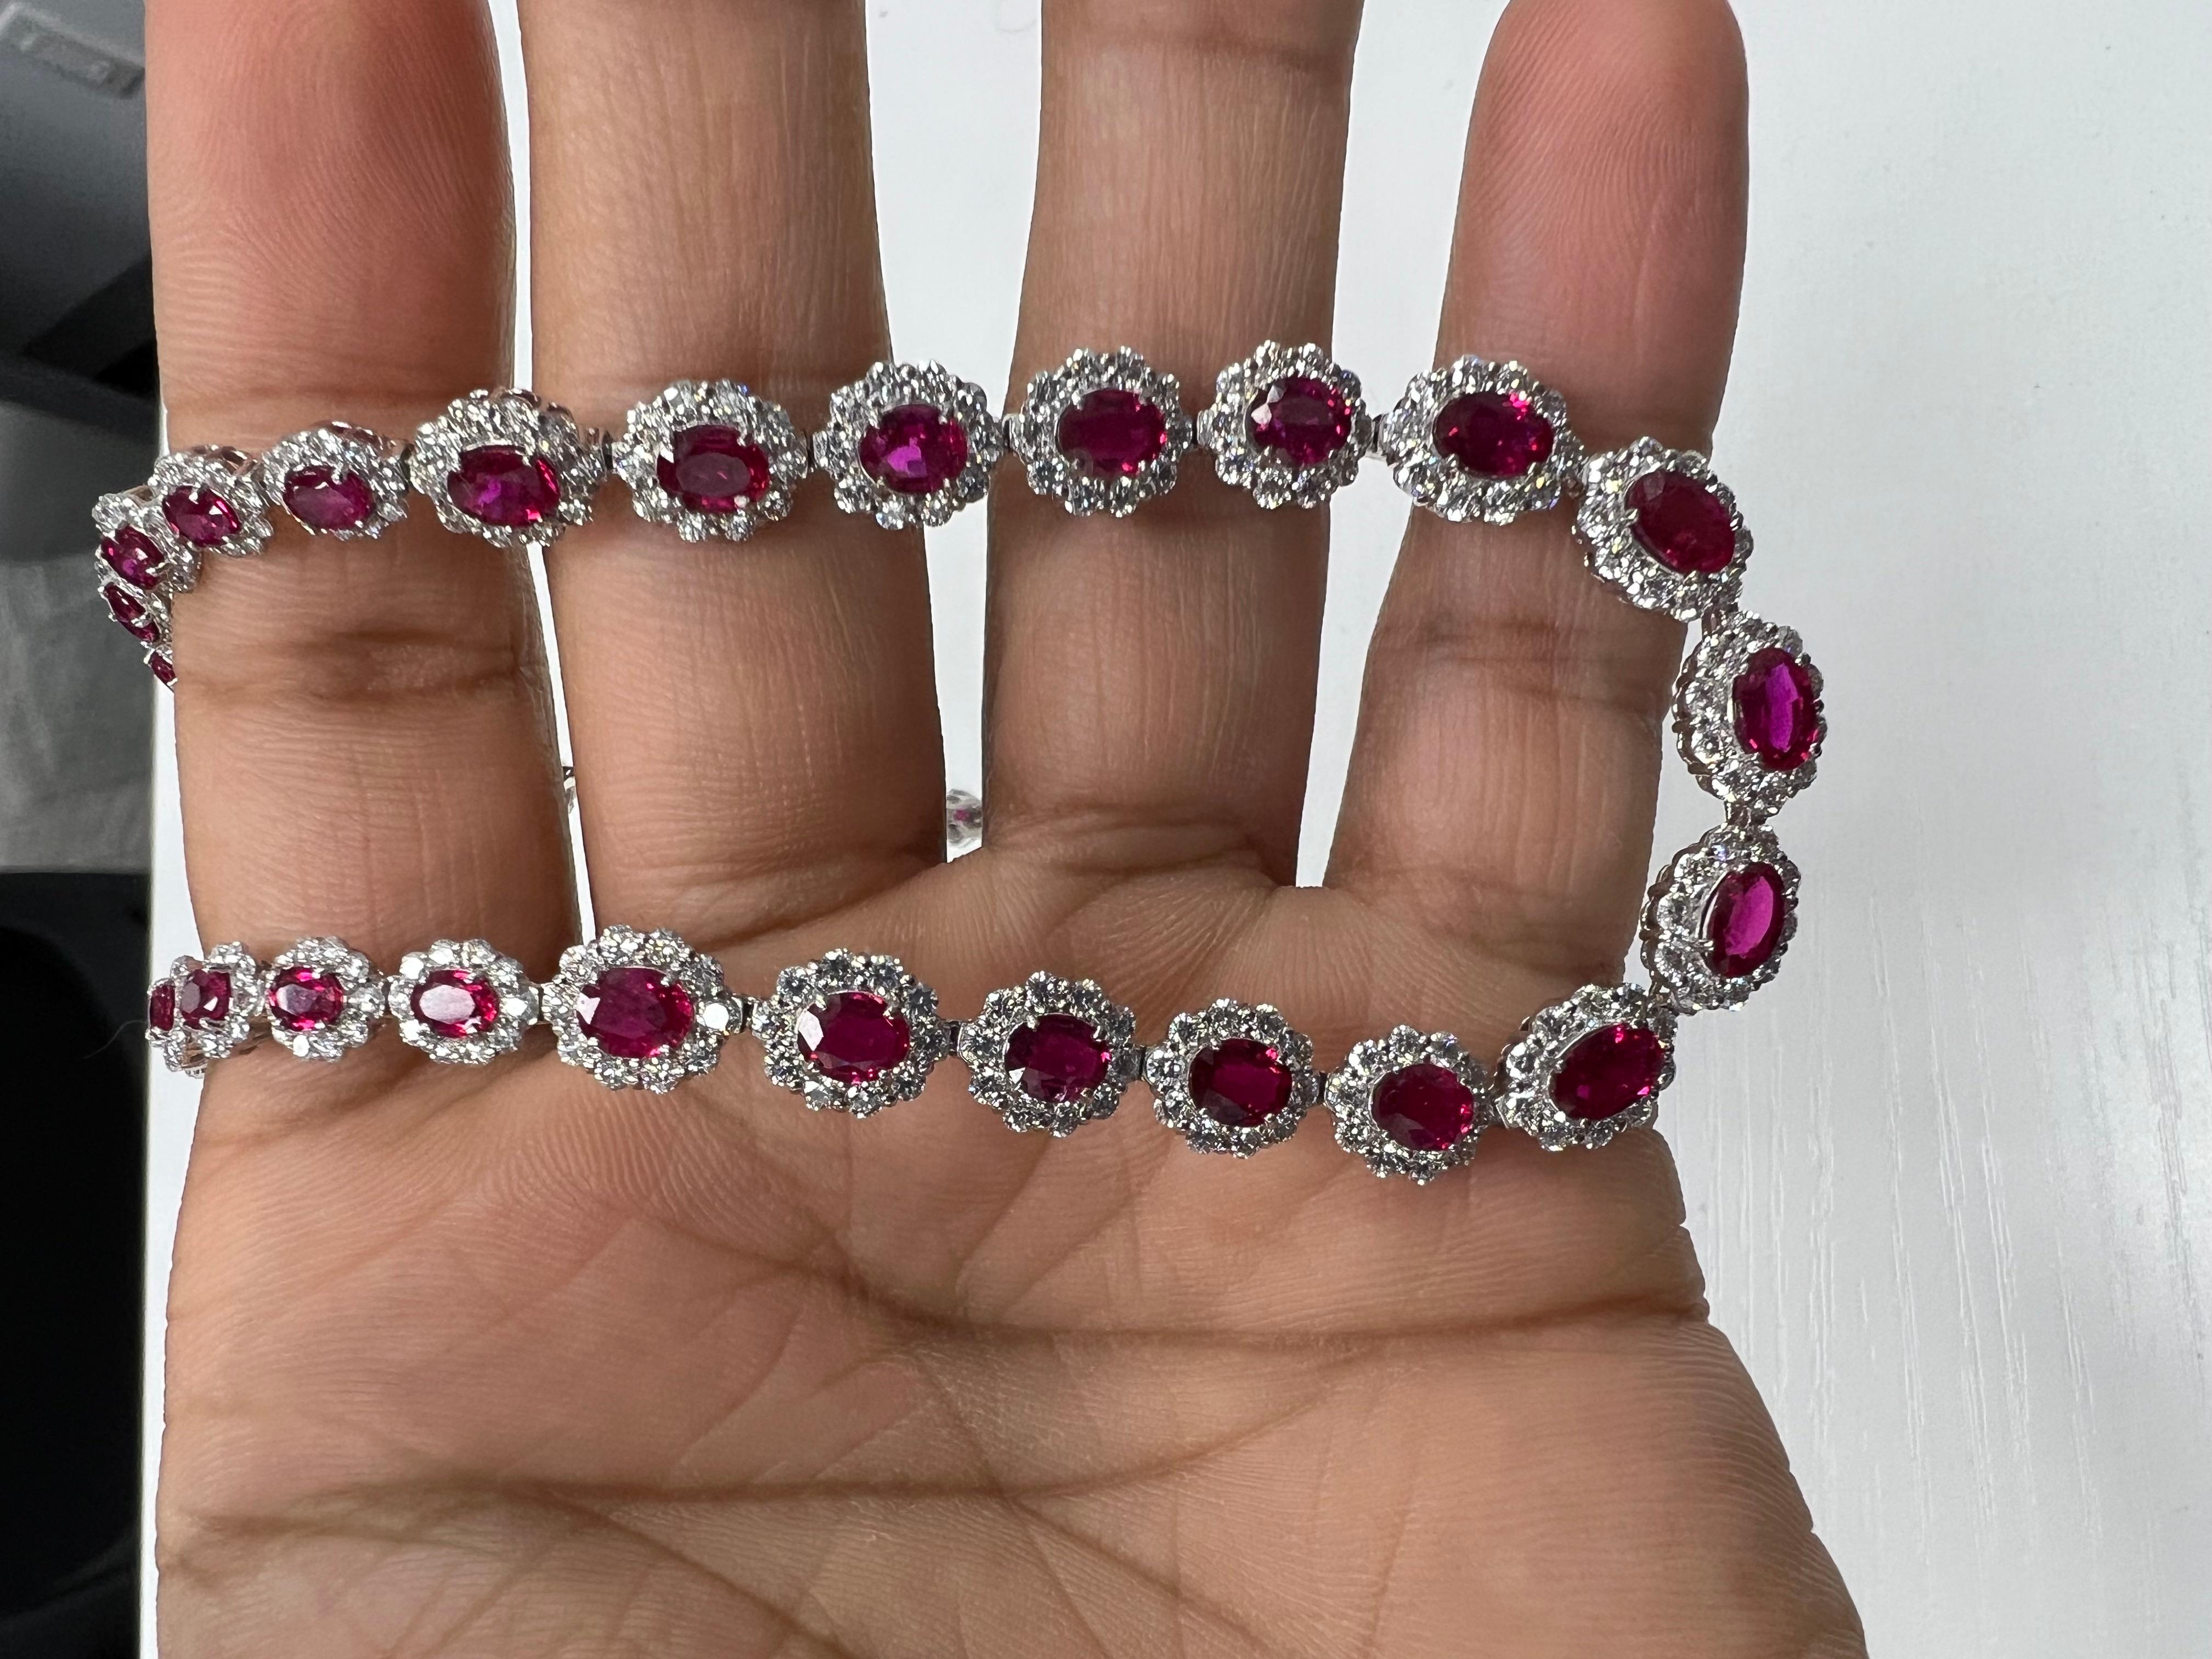 Elegance Redefined: Discover the GIA Certified 14.02 Carat No Heat Mozambique Ruby and Diamond Graduated Necklace

Indulge in the epitome of luxury with our exquisite GIA Certified 14.02 carat No Heat Mozambique Ruby and Diamond Graduated Necklace,